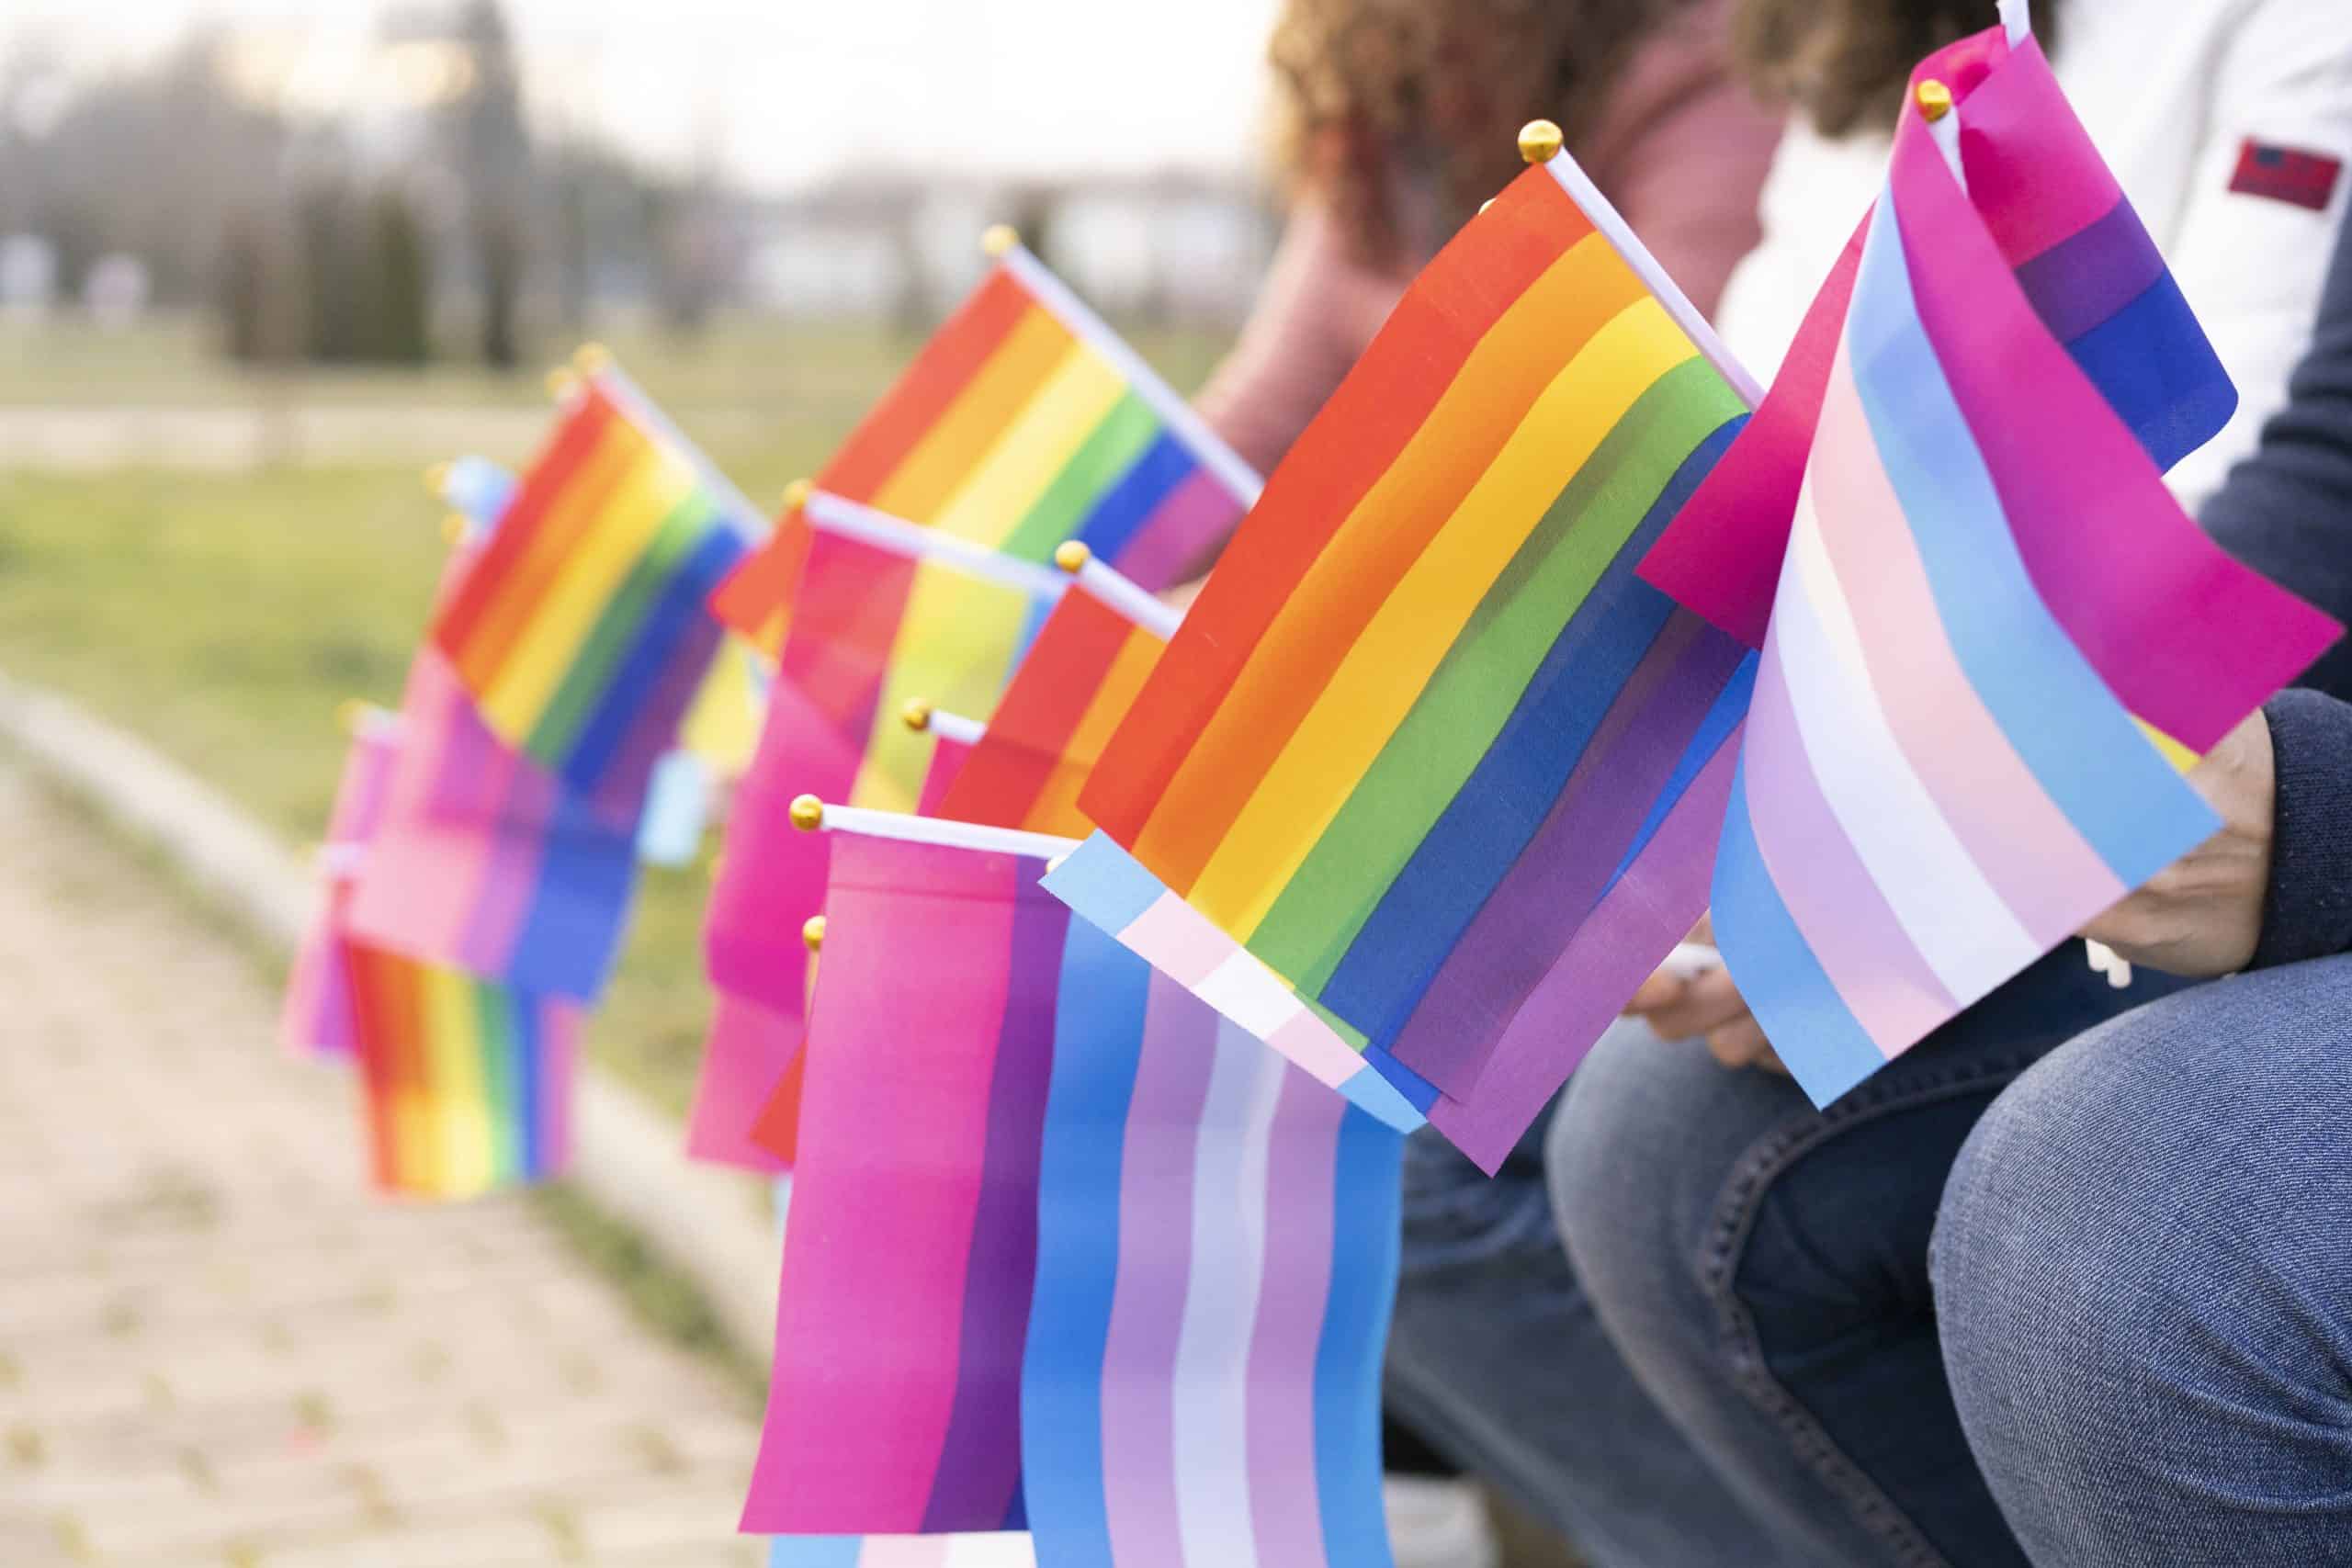 People sitting on a bench holding different flags for the protest defending the LGBTQ rights